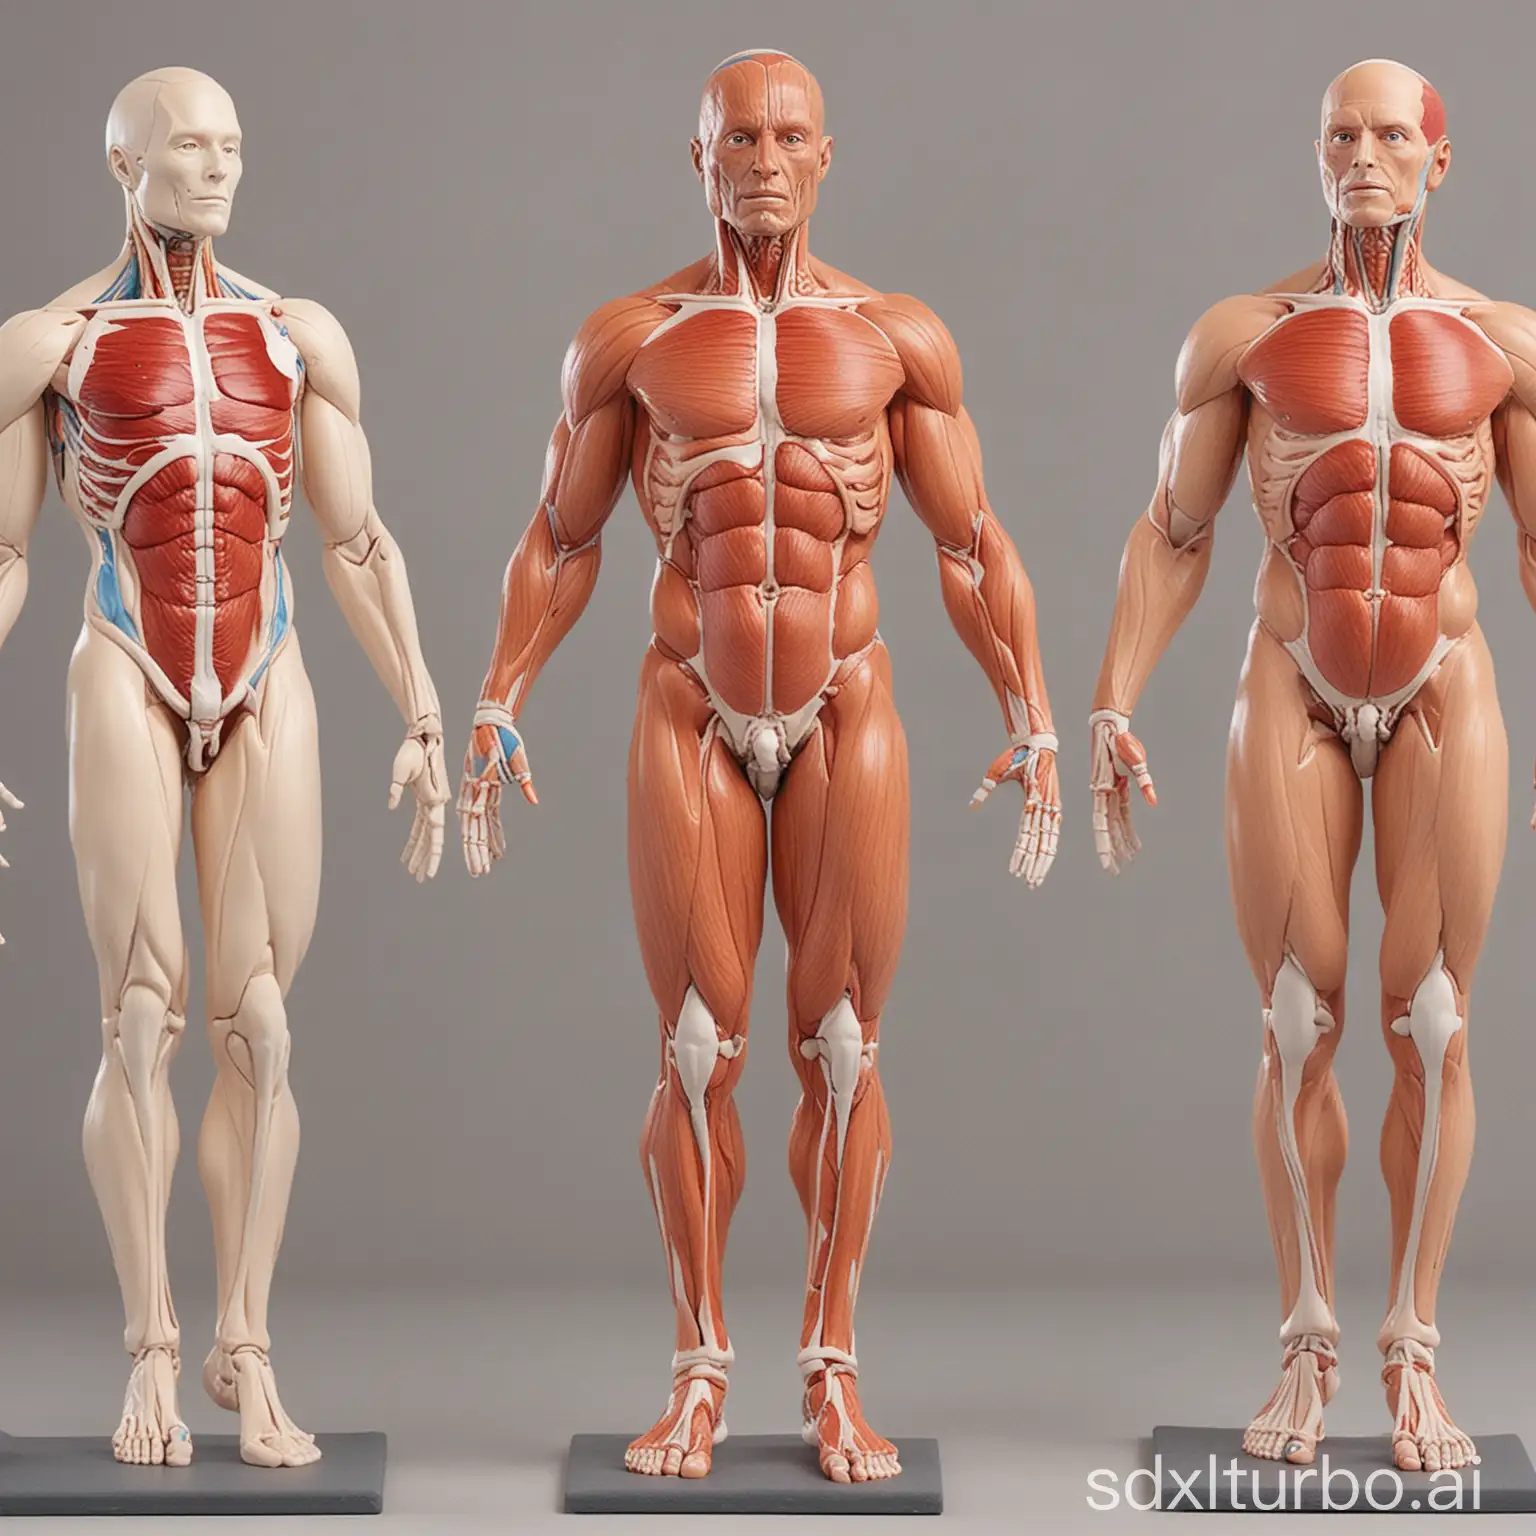 The human body model in the classroom